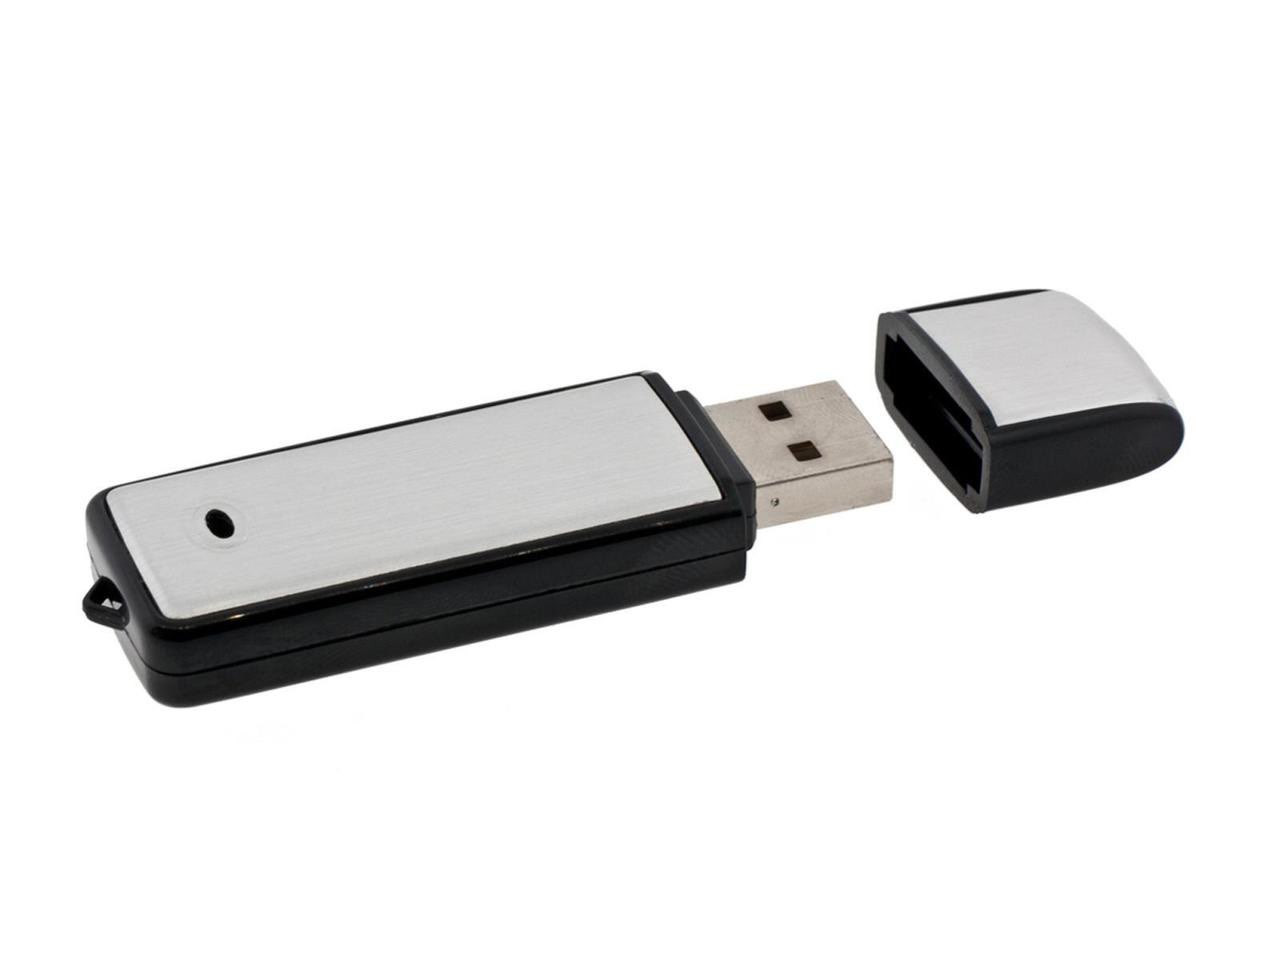 windows voice recorder 2 usb headsets simultaneously